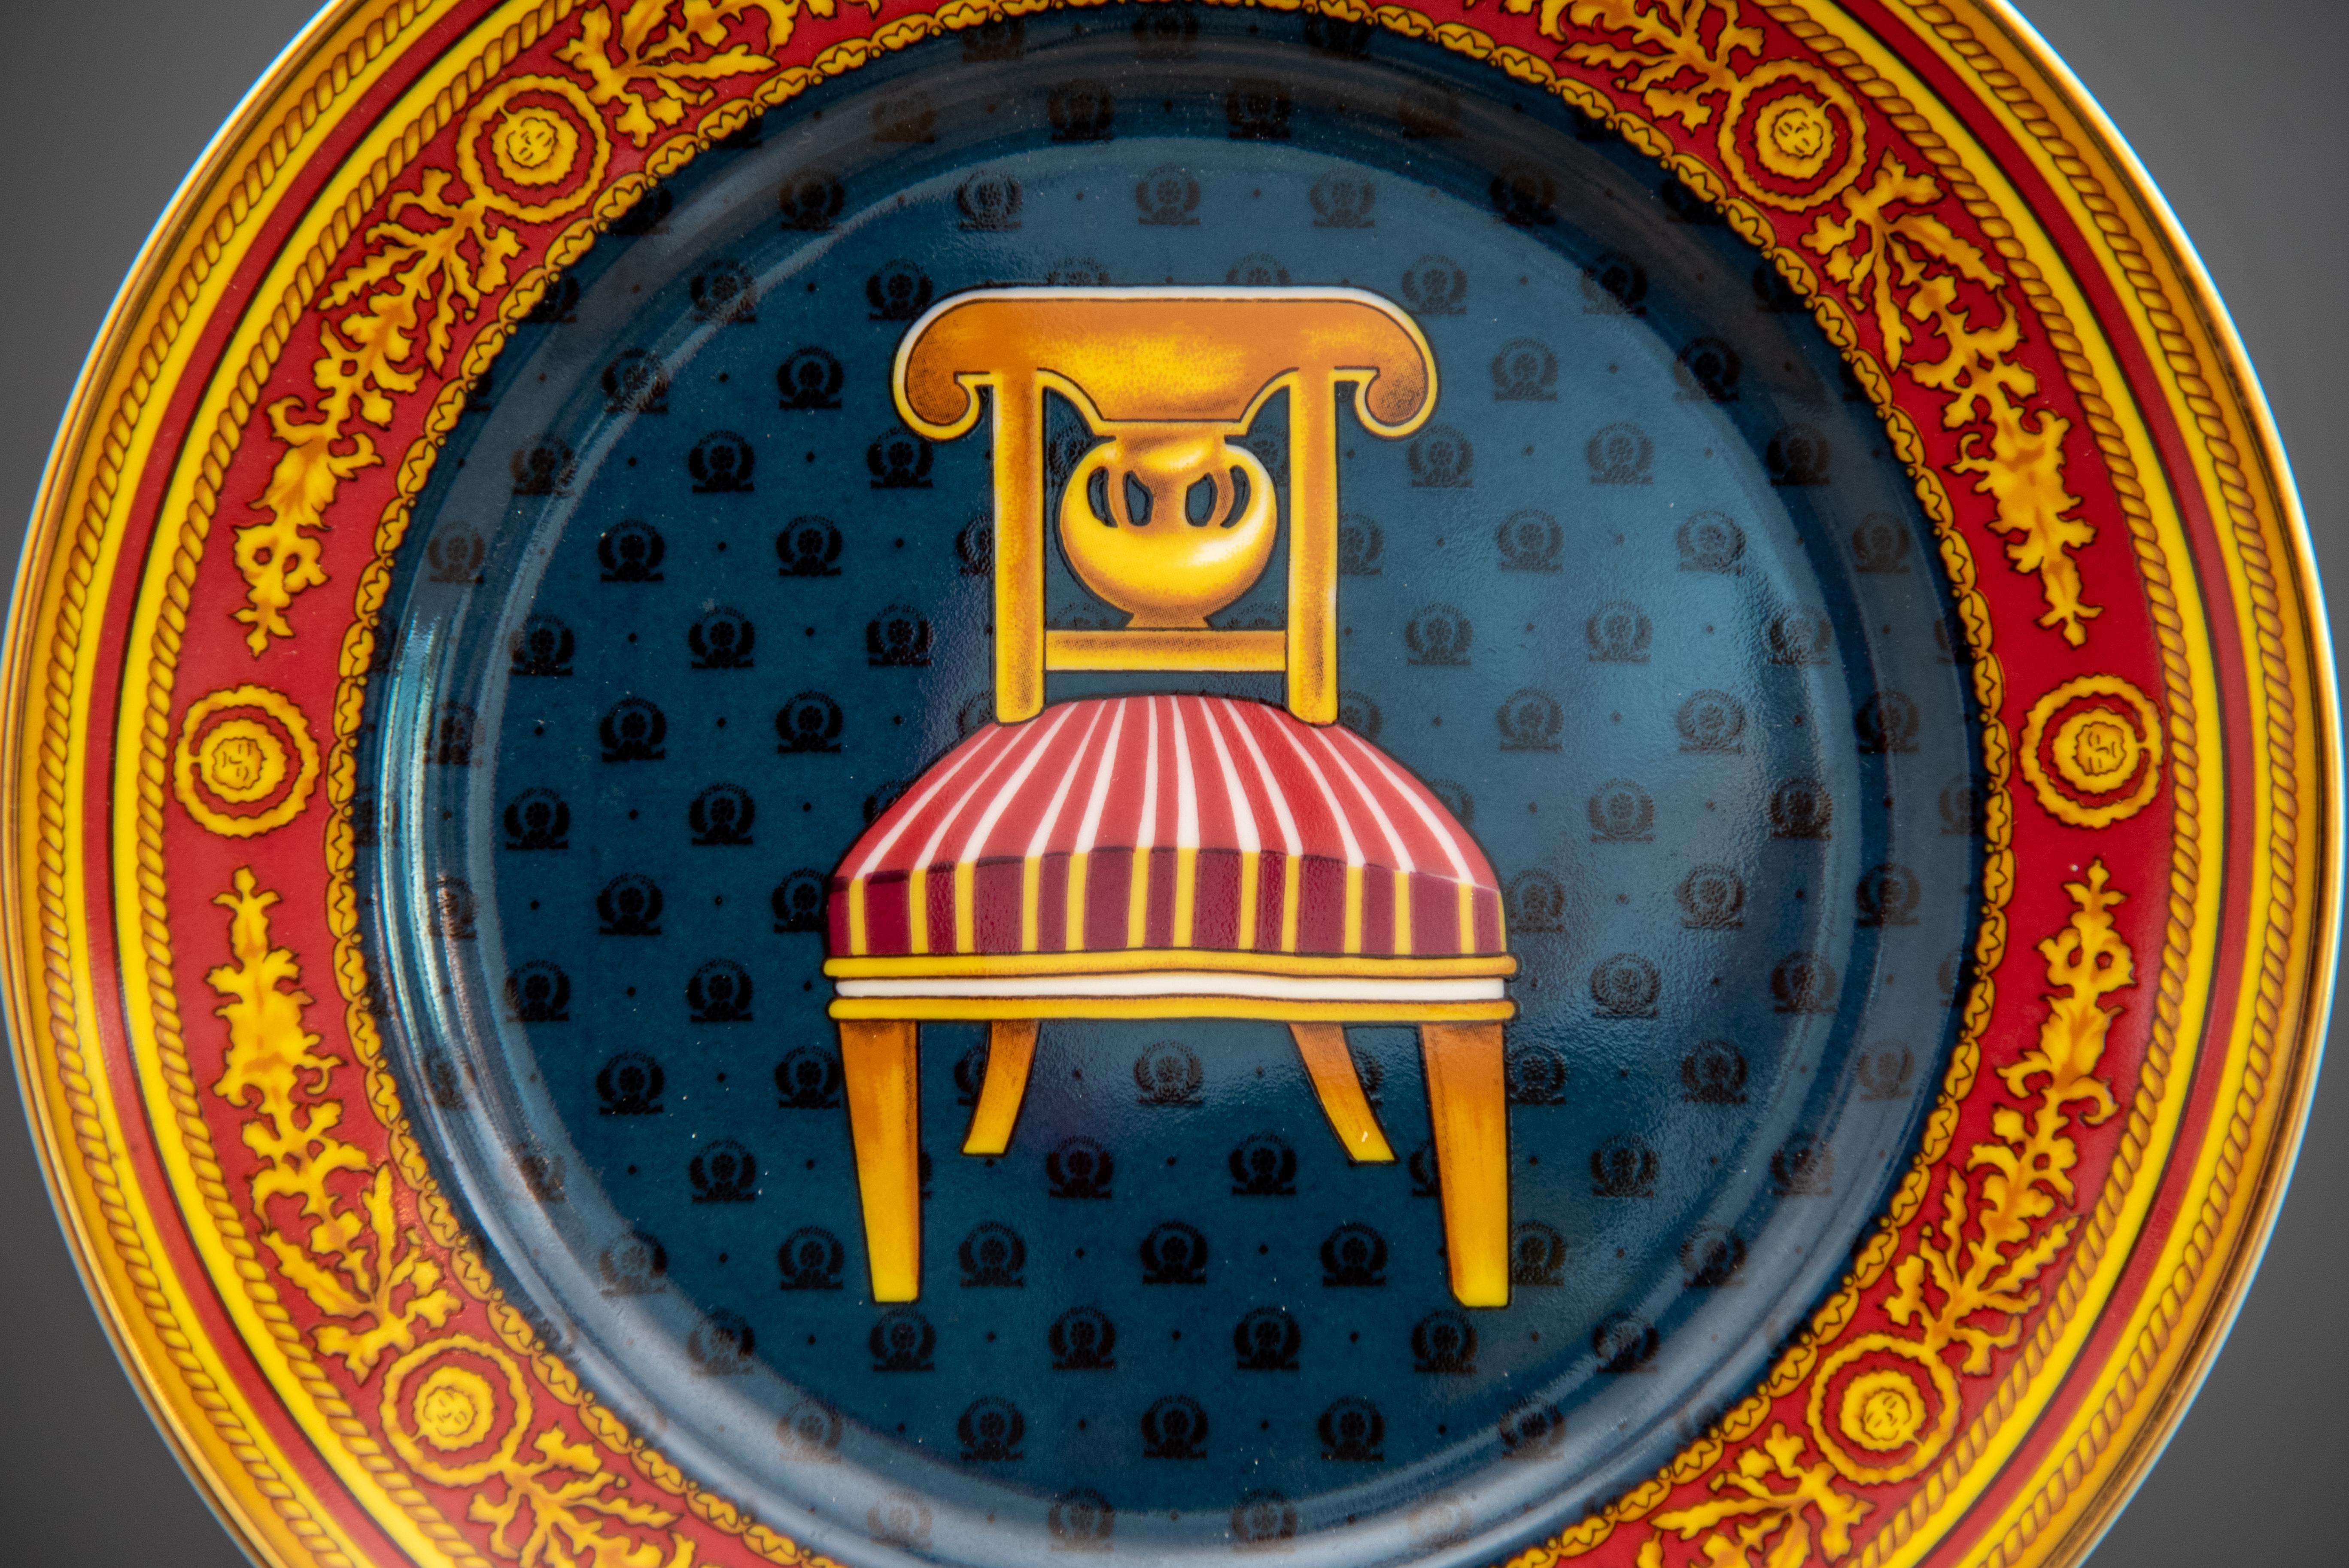 Italian Vintage Gucci Chair Collection plate
Porcelain decorative objects
Porcelain plate back-stamped Gucci.

Every item of our Gallery, upon request, is accompanied by a certificate of authenticity issued by Sabrina Egidi official Expert in